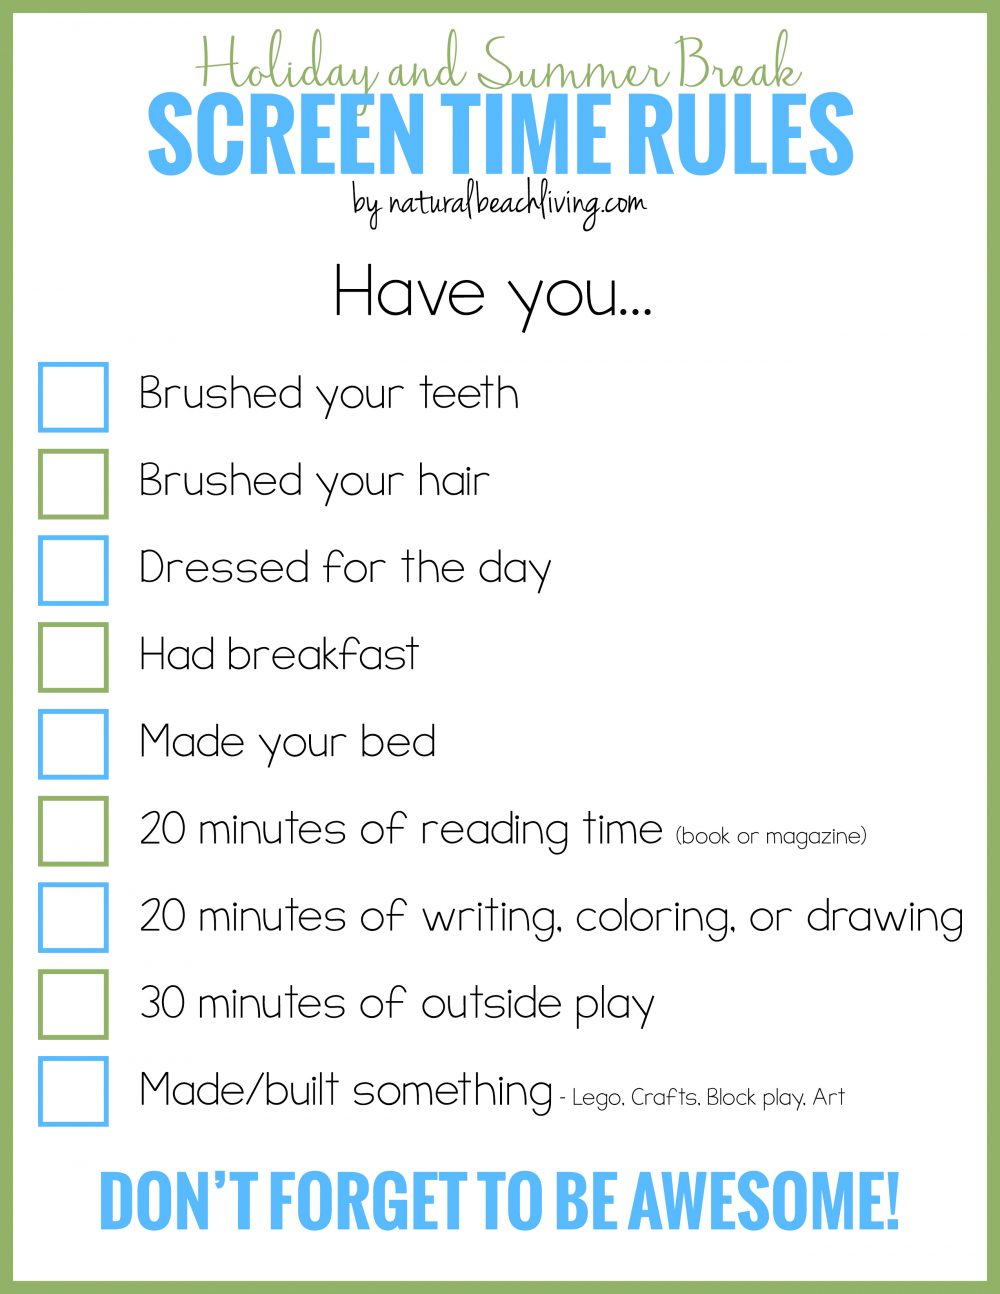 Holiday and Summer Break Screen Time Rules for Kids